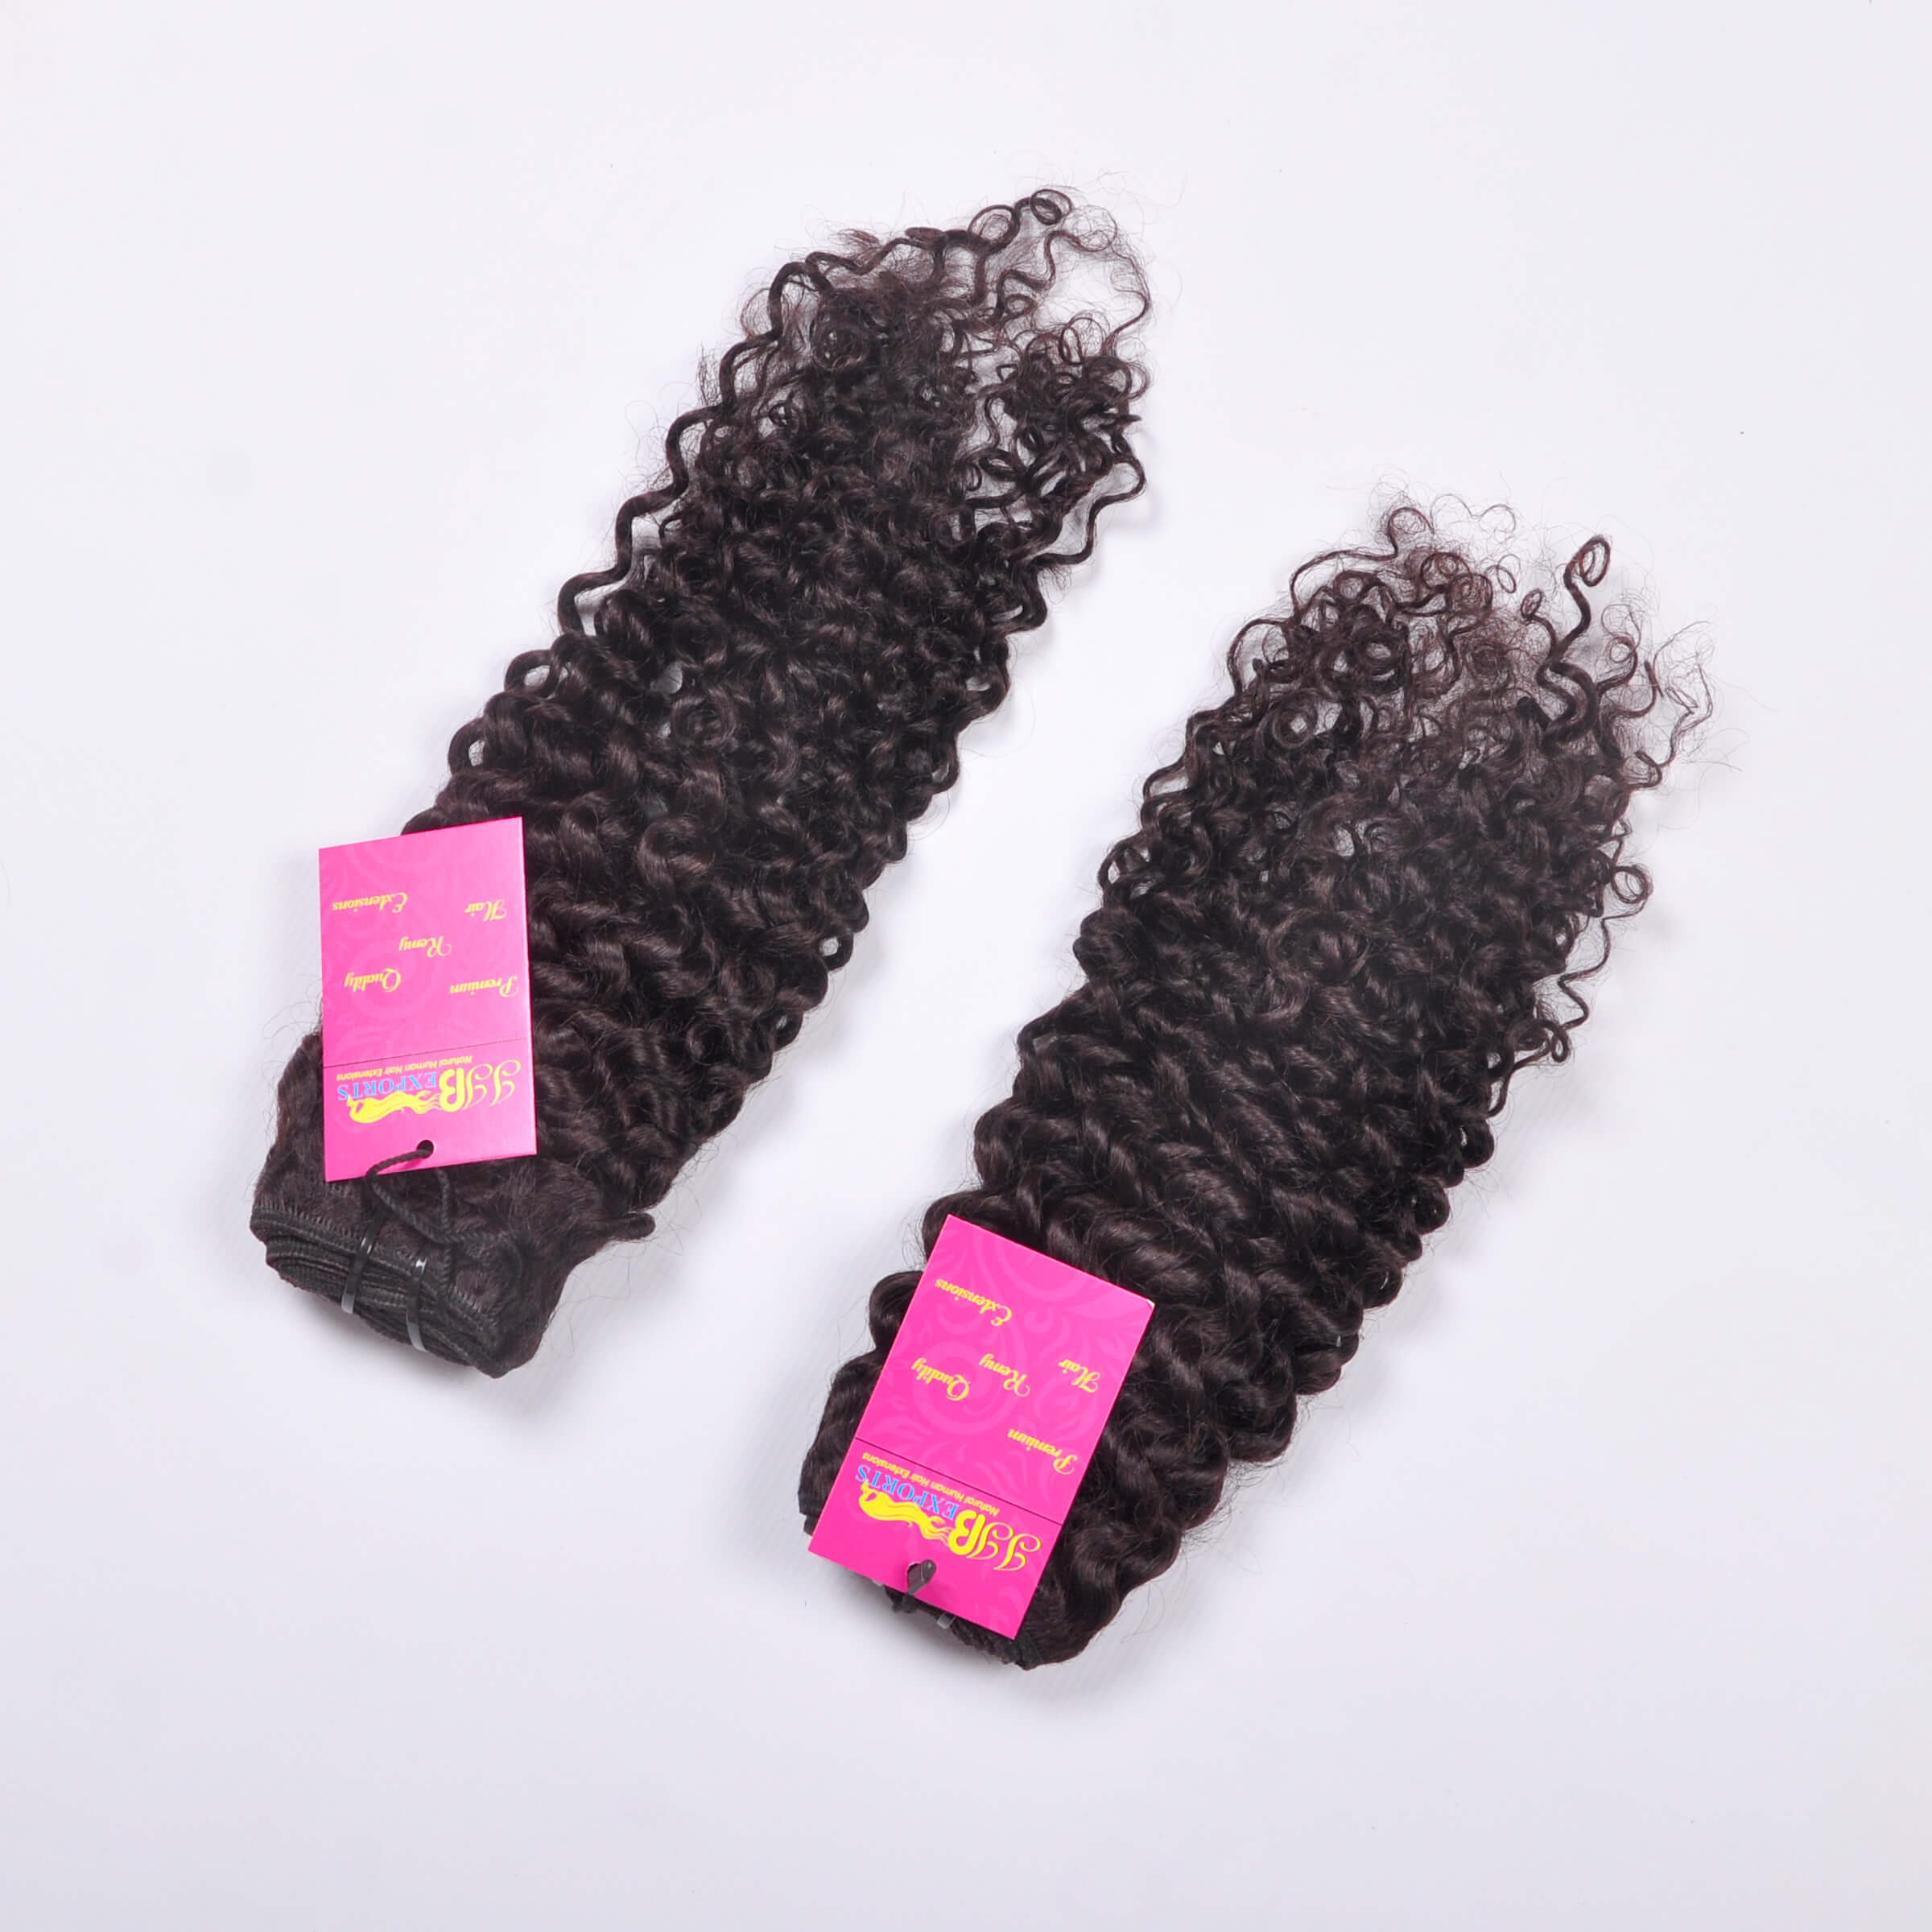 Indian Virgin Unprocessed Raw Curly Human Hair Machine Made Double Wefted Bundles